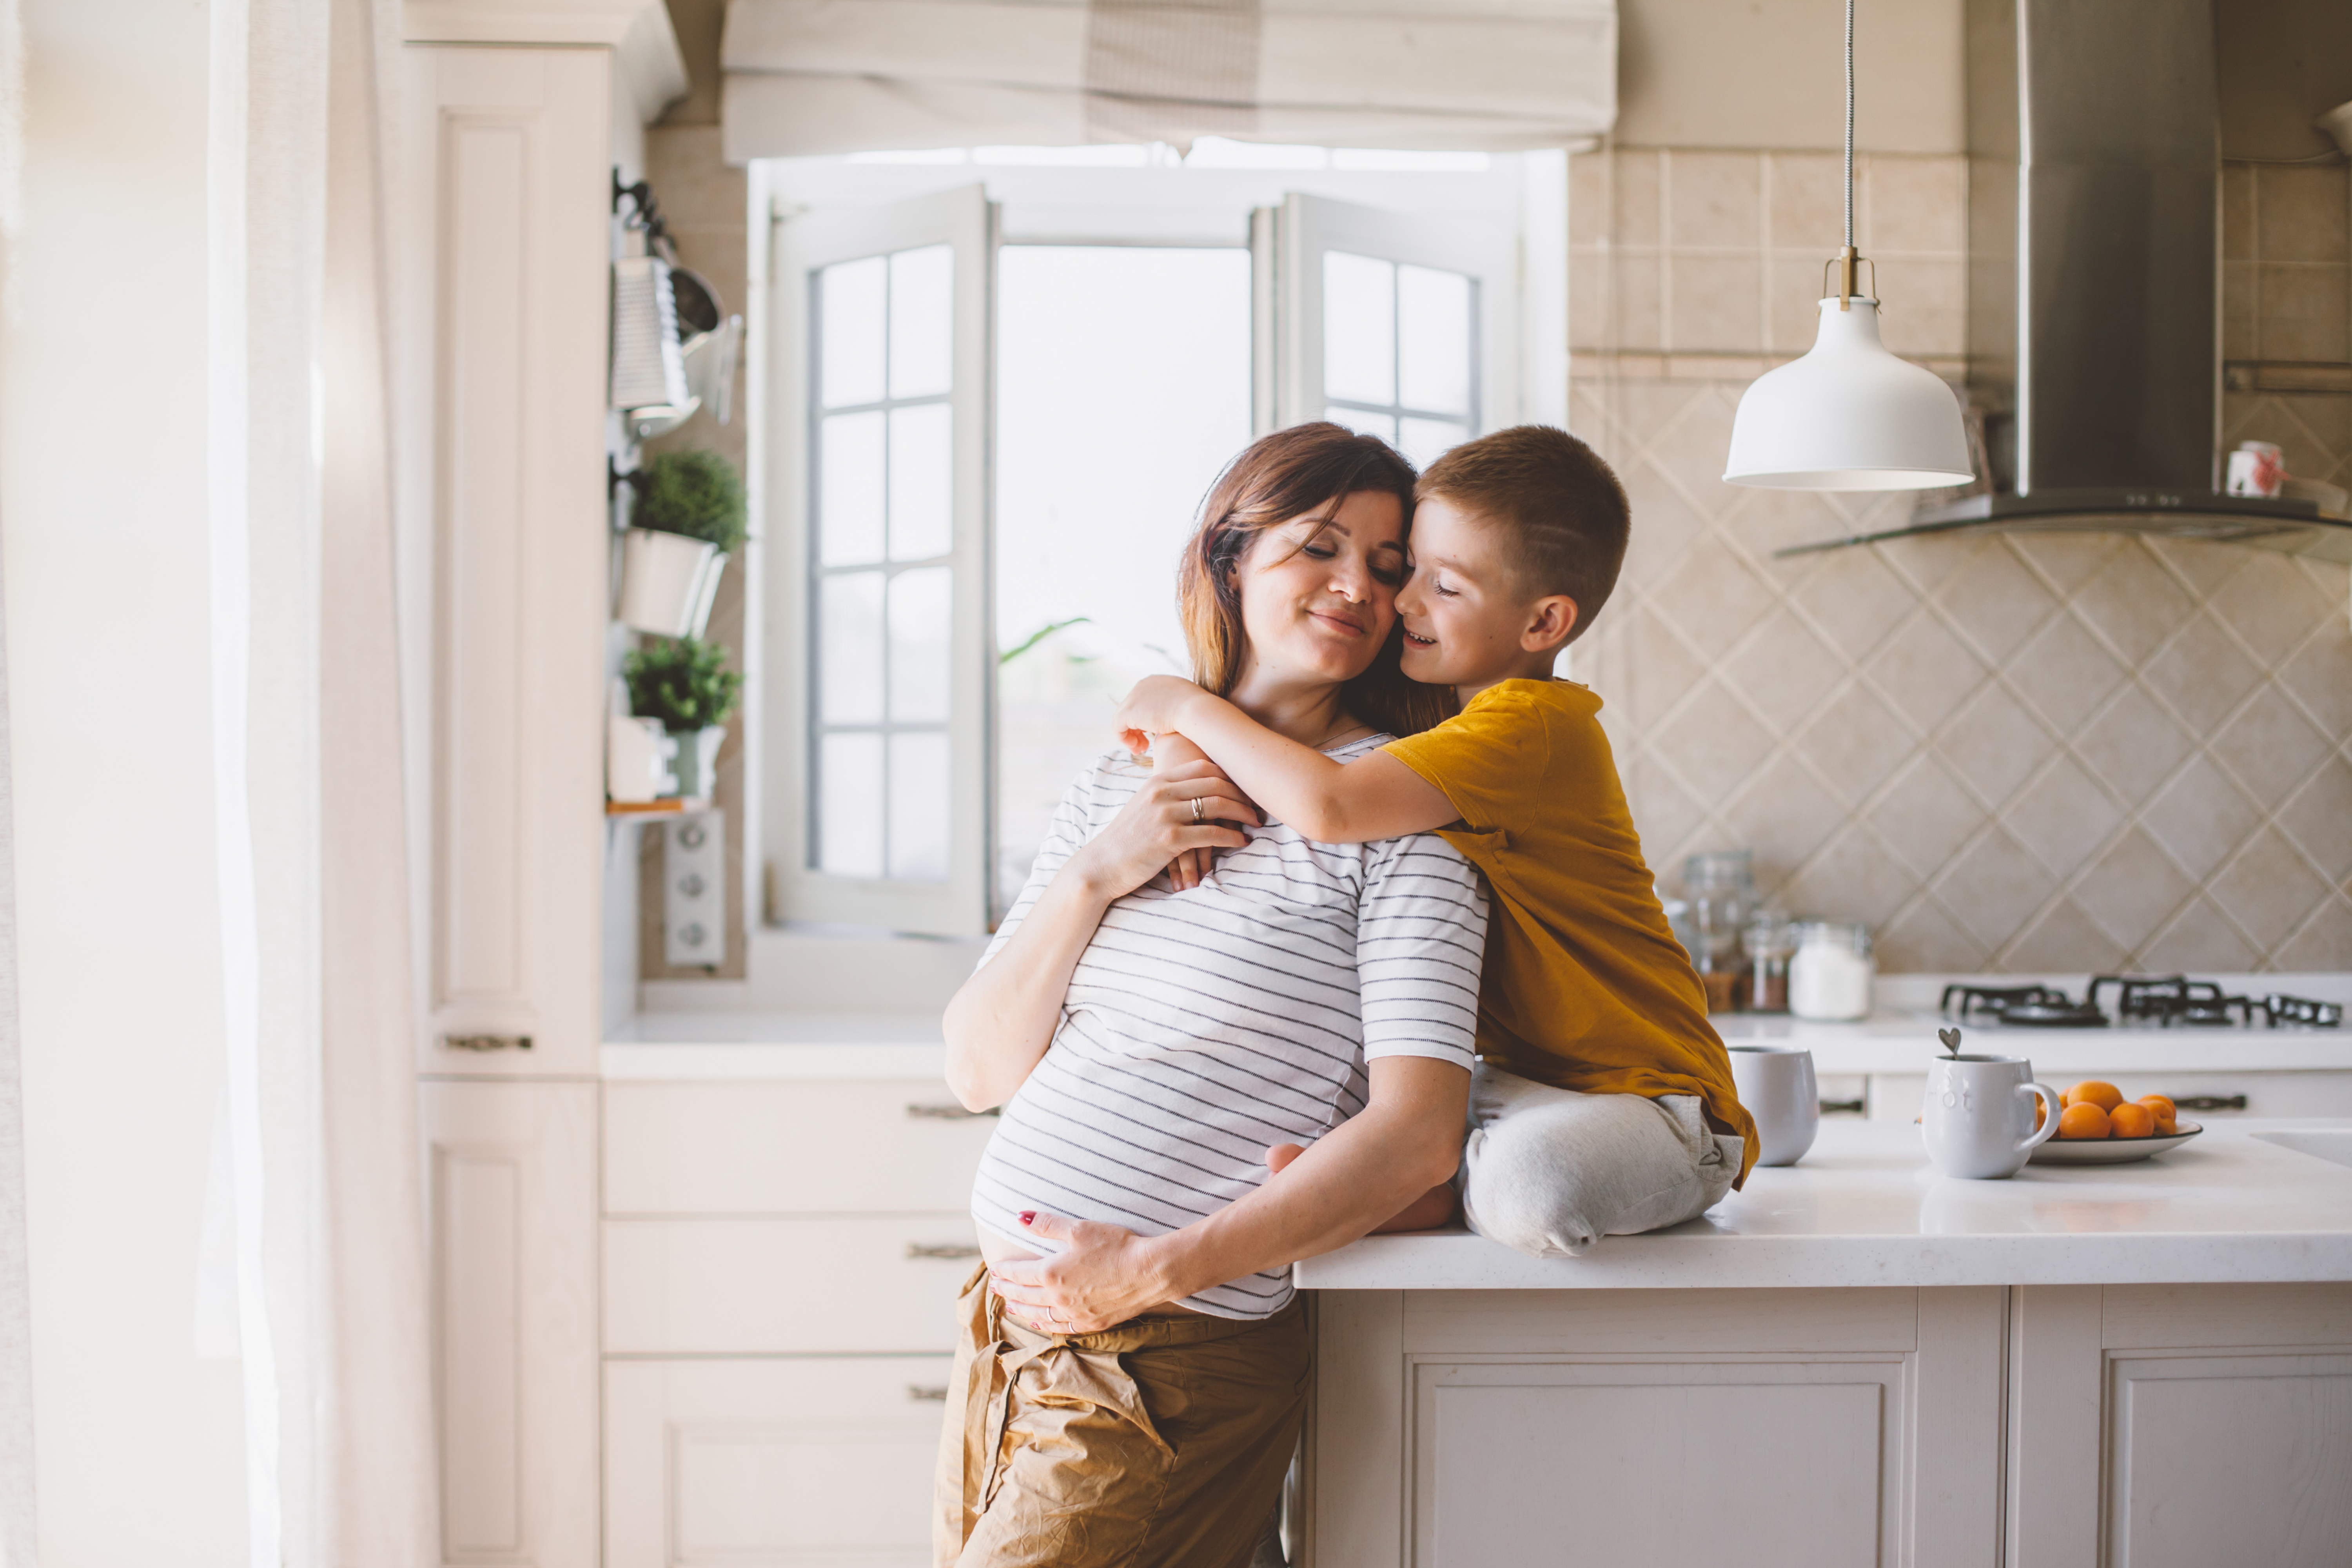 Pregnant Mom in the Kitchen with her son | Moms Should Take Care of Themselves First